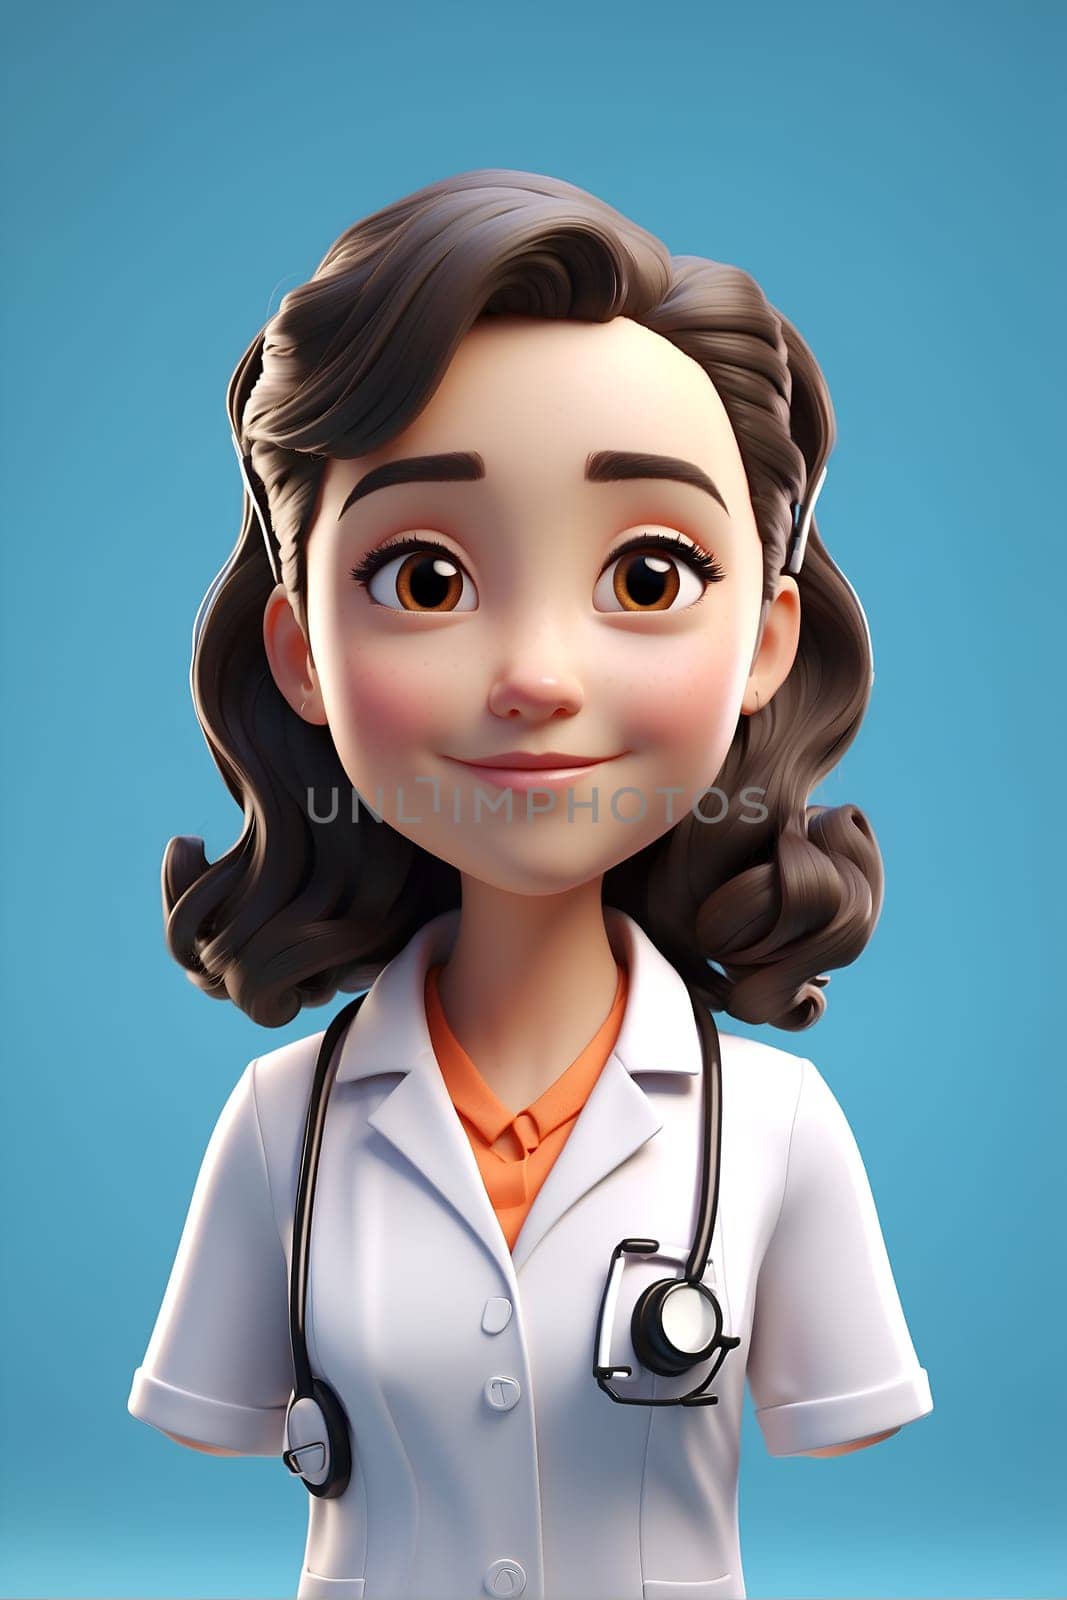 A cartoon character wearing a stethoscope stands confidently against a vibrant blue backdrop.